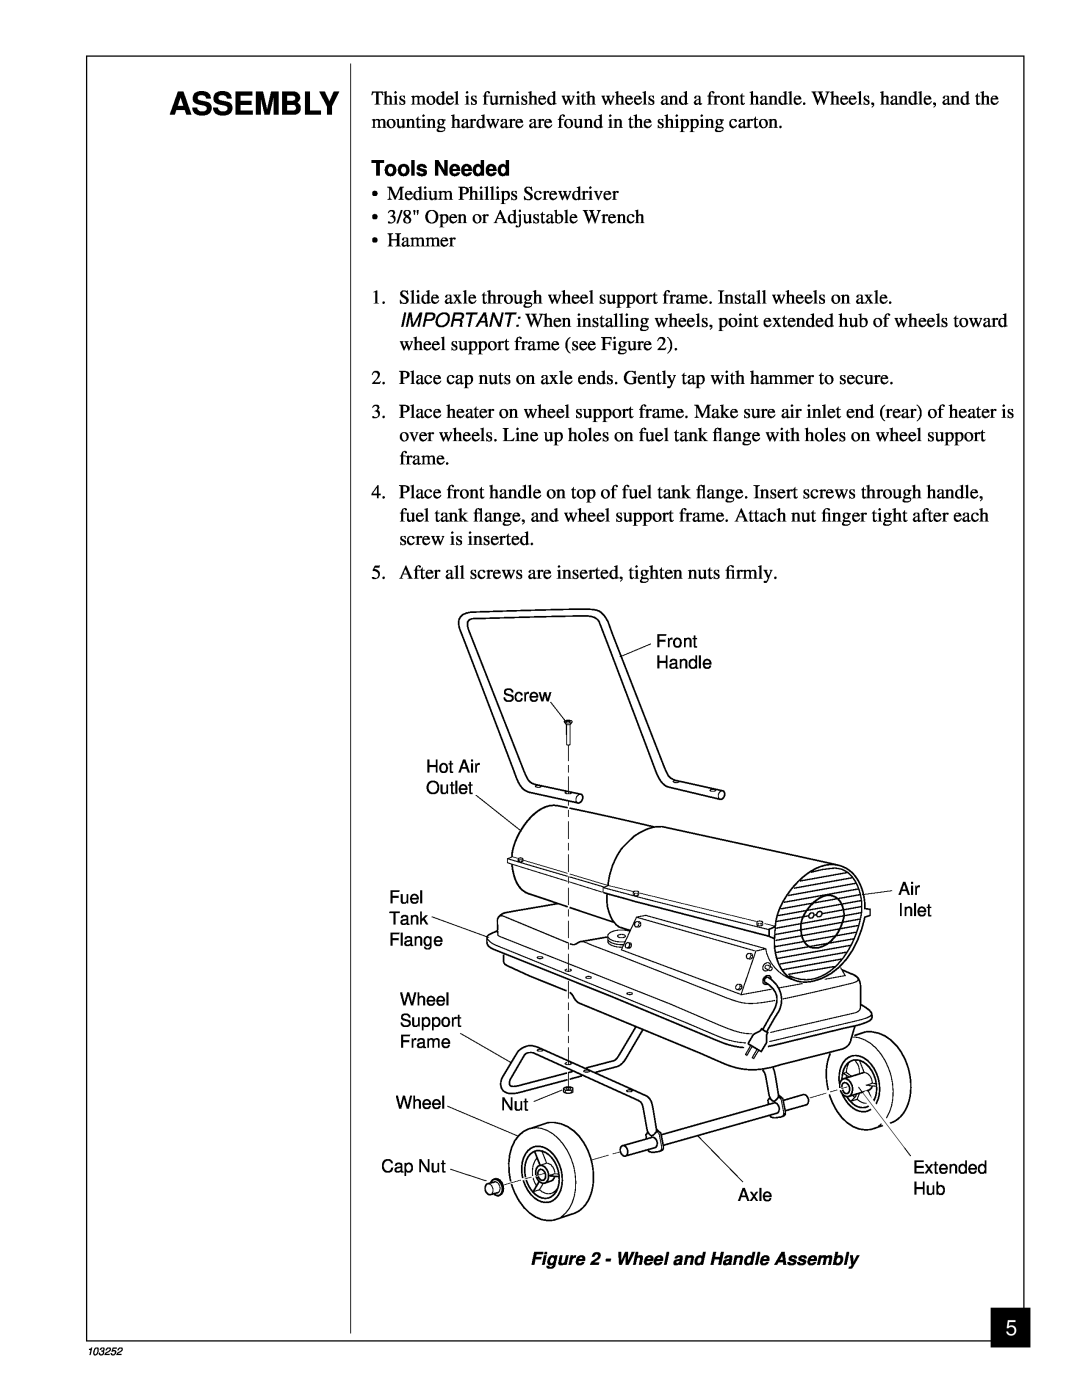 Desa RK150 owner manual Assembly, Tools Needed 